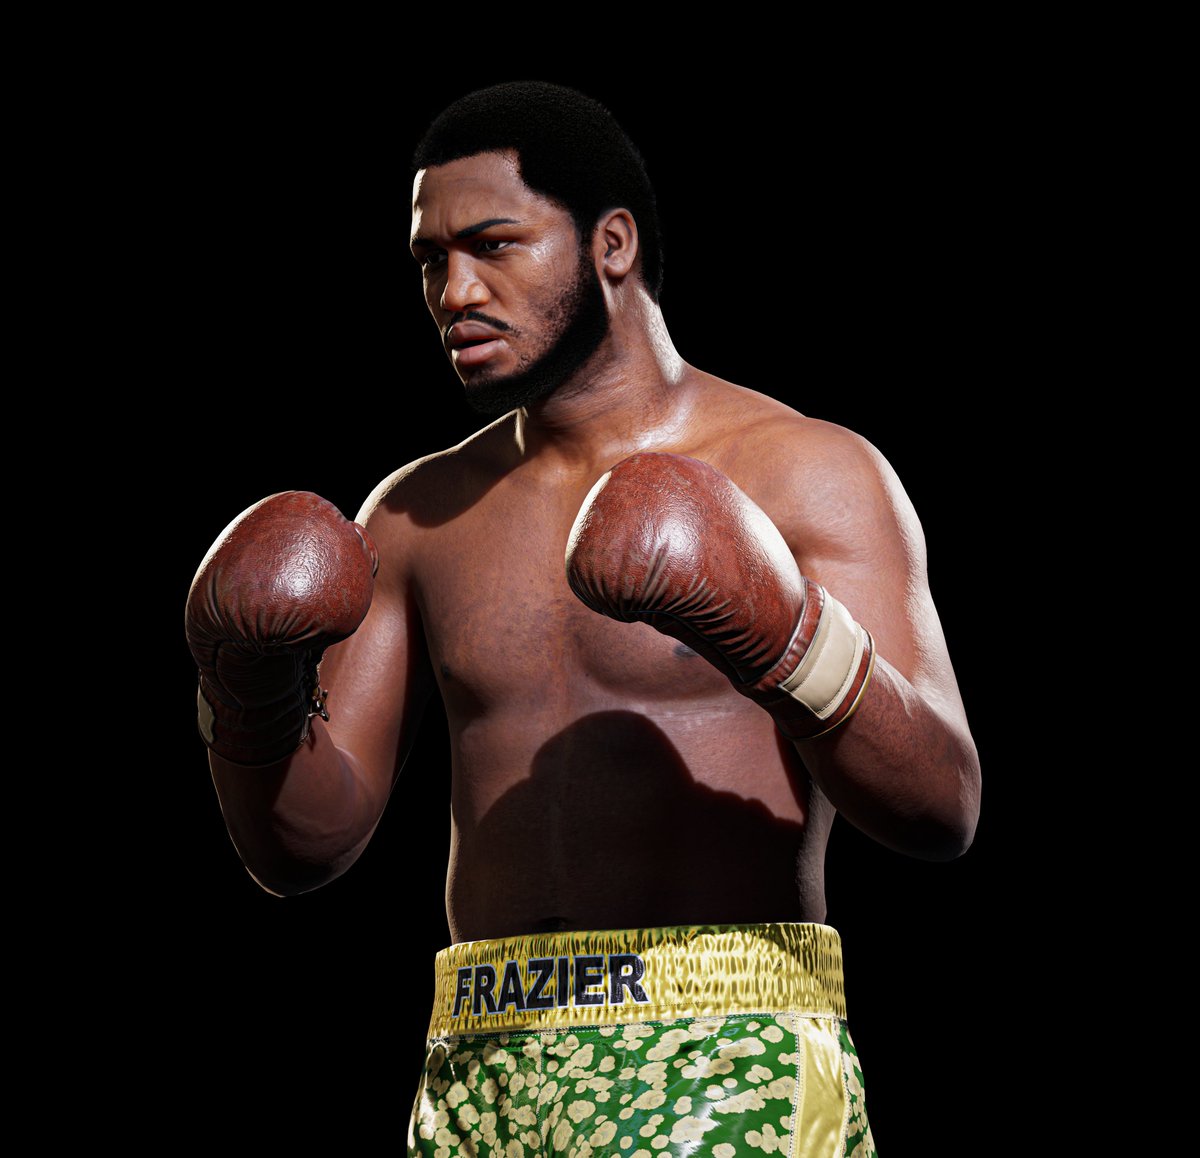 Excited to confirm that 'Smokin'' Joe Frazier, the former undisputed heavyweight world champion and 3-time @ringmagazine 'Fighter of the Year', will be available on day 1 of early access in Undisputed! #BecomeUndisputed 🥊